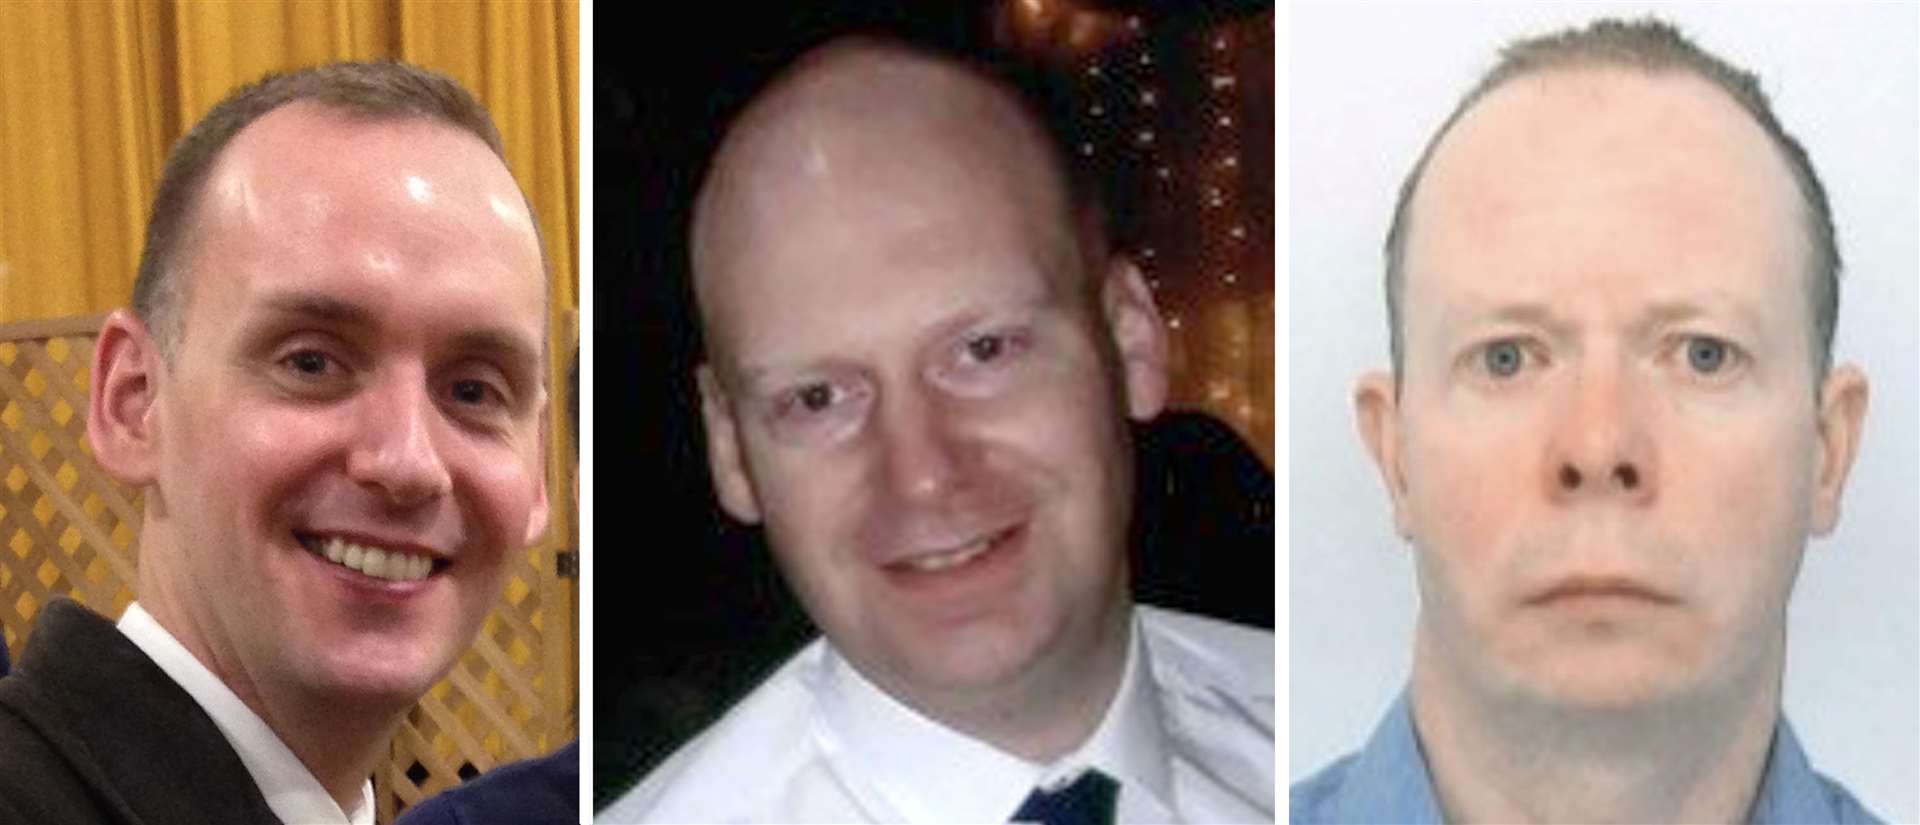 (left to right) Joe Ritchie-Bennett, James Furlong and David Wails, the three victims of the terror attack (Thames Valley Police/PA)